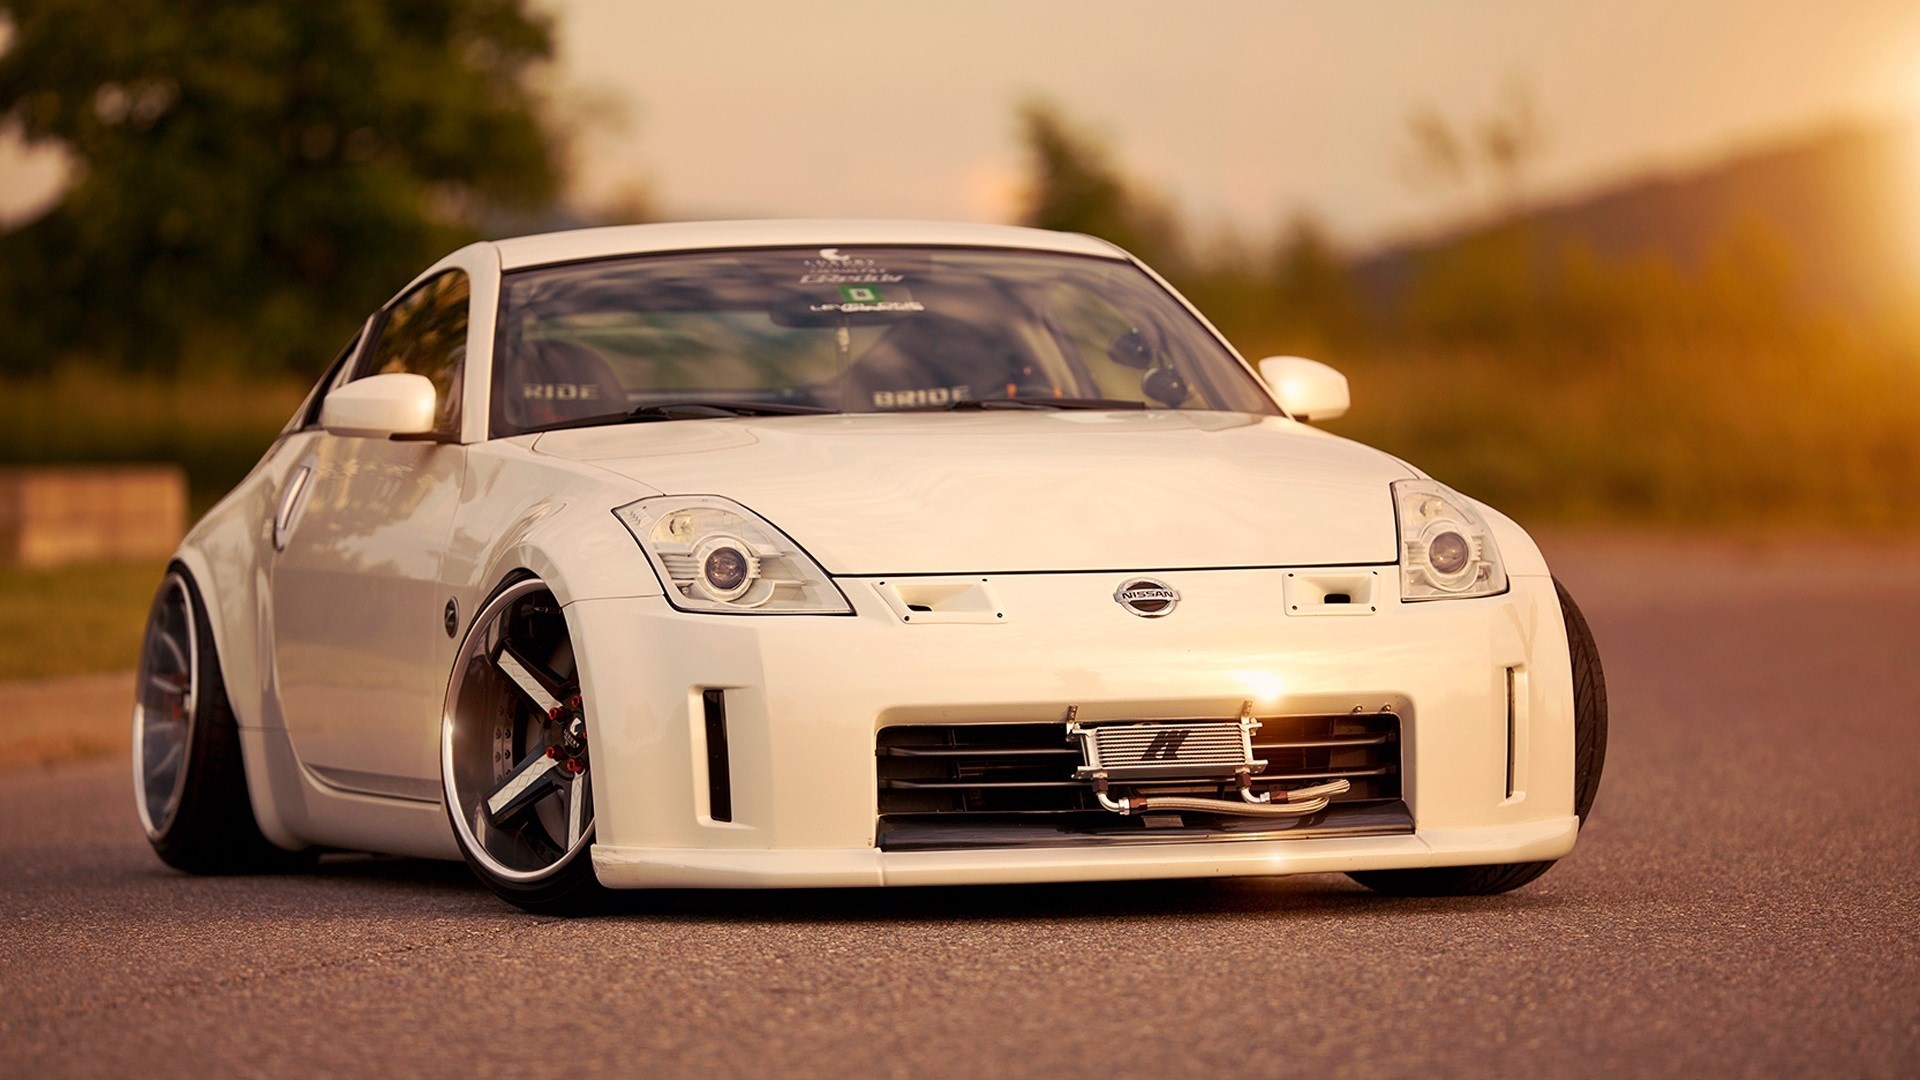 Nissan 350z Full HD Wallpaper And Background